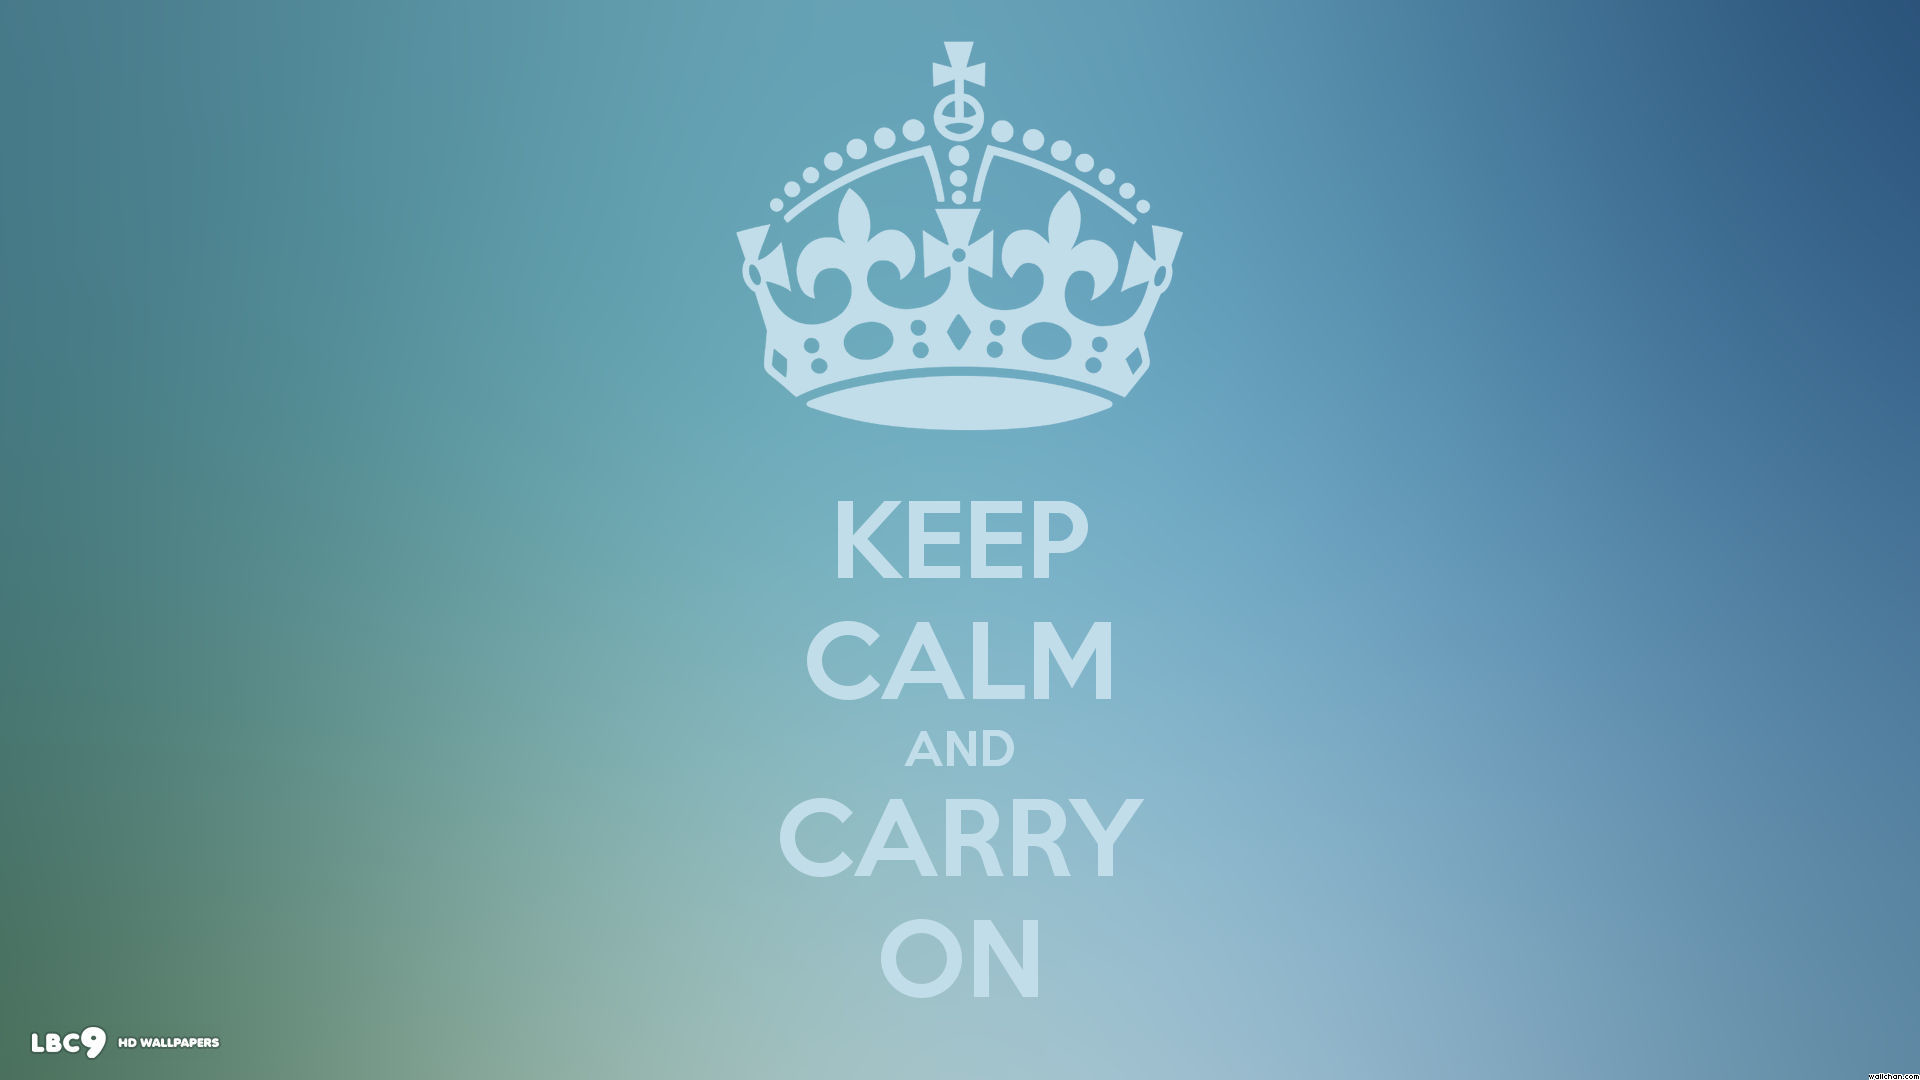 keep calm wallpapers,text,crown,font,logo,turquoise